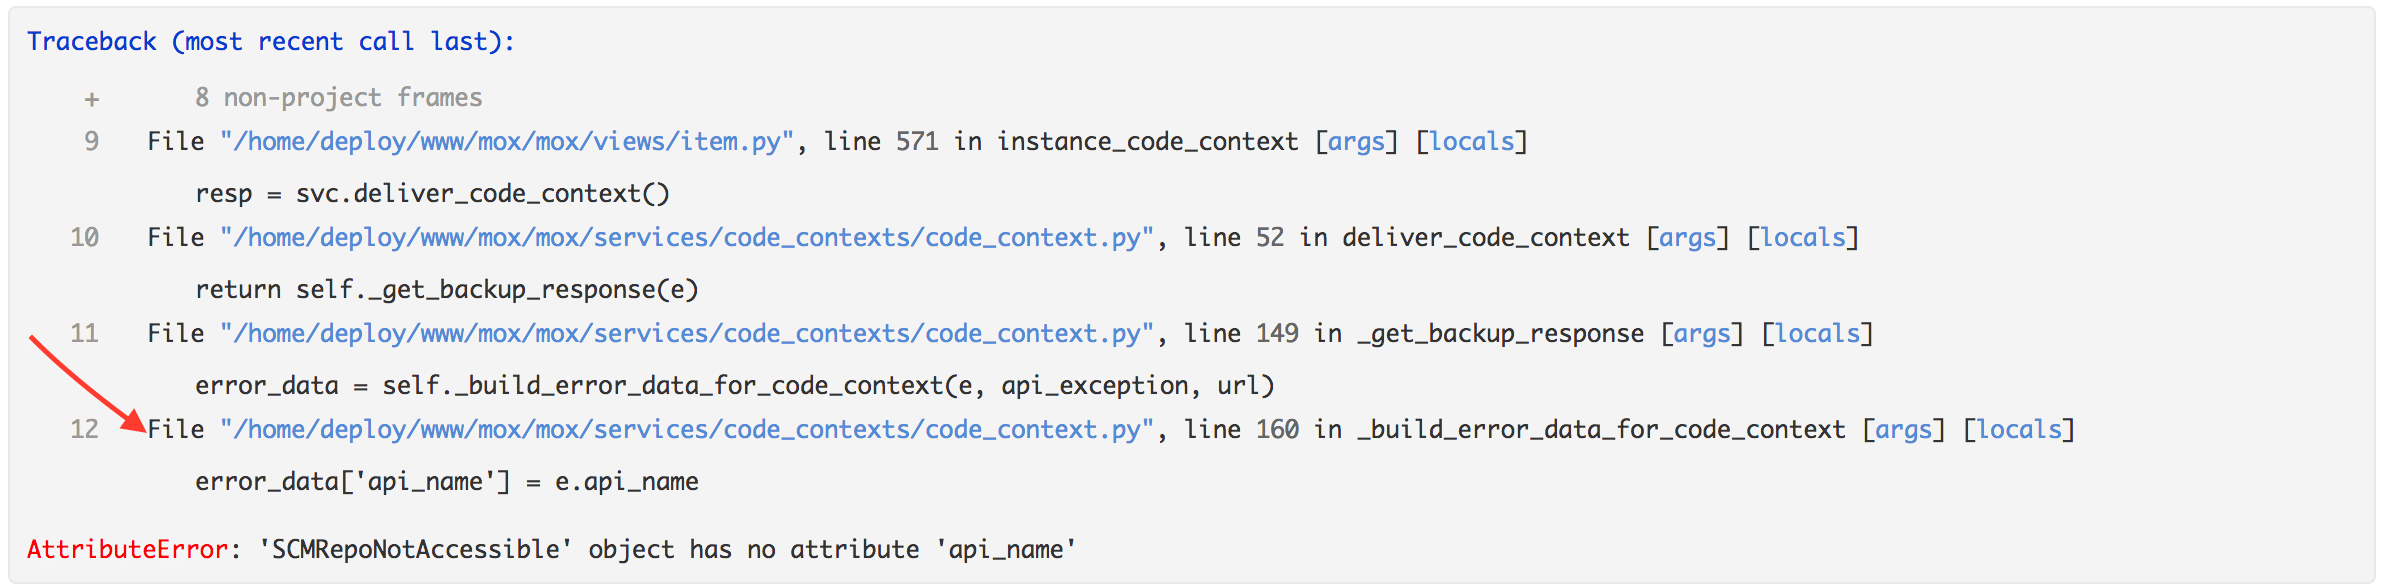 Traceback without code context